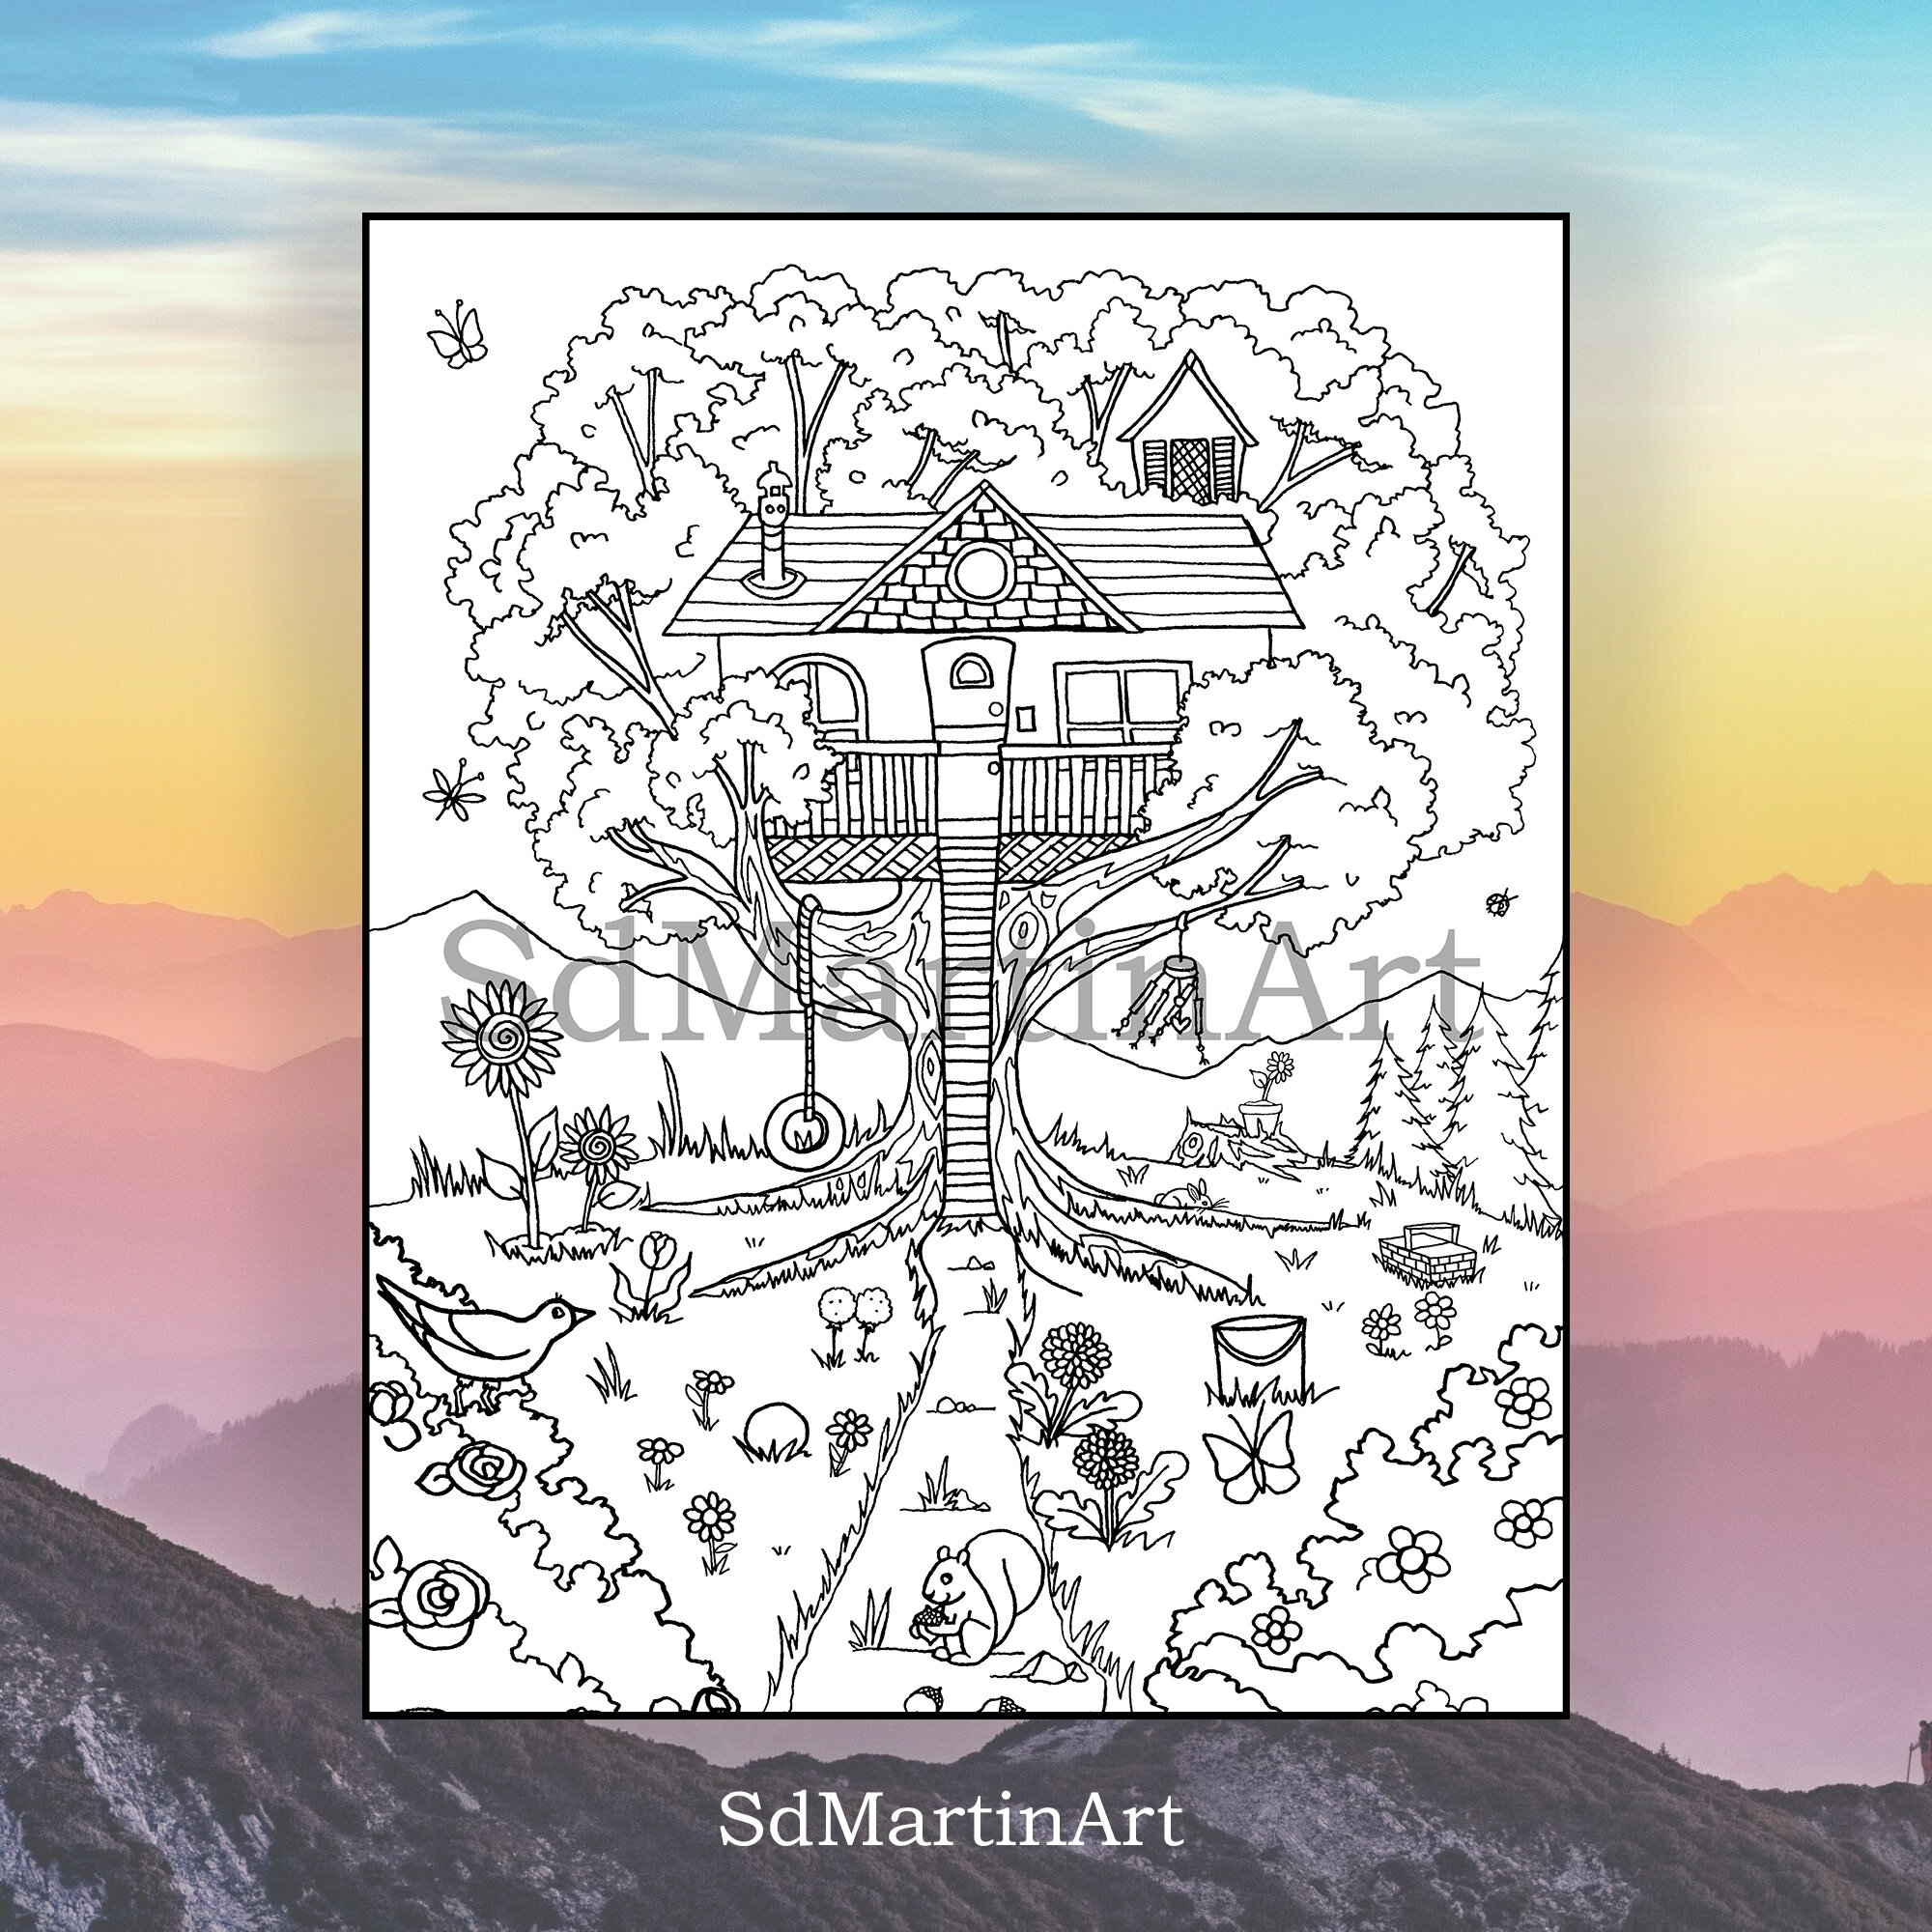 SdMartinArt_Tree House_Coloring Page_NEW Canva PRVW IMG with WM.jpg